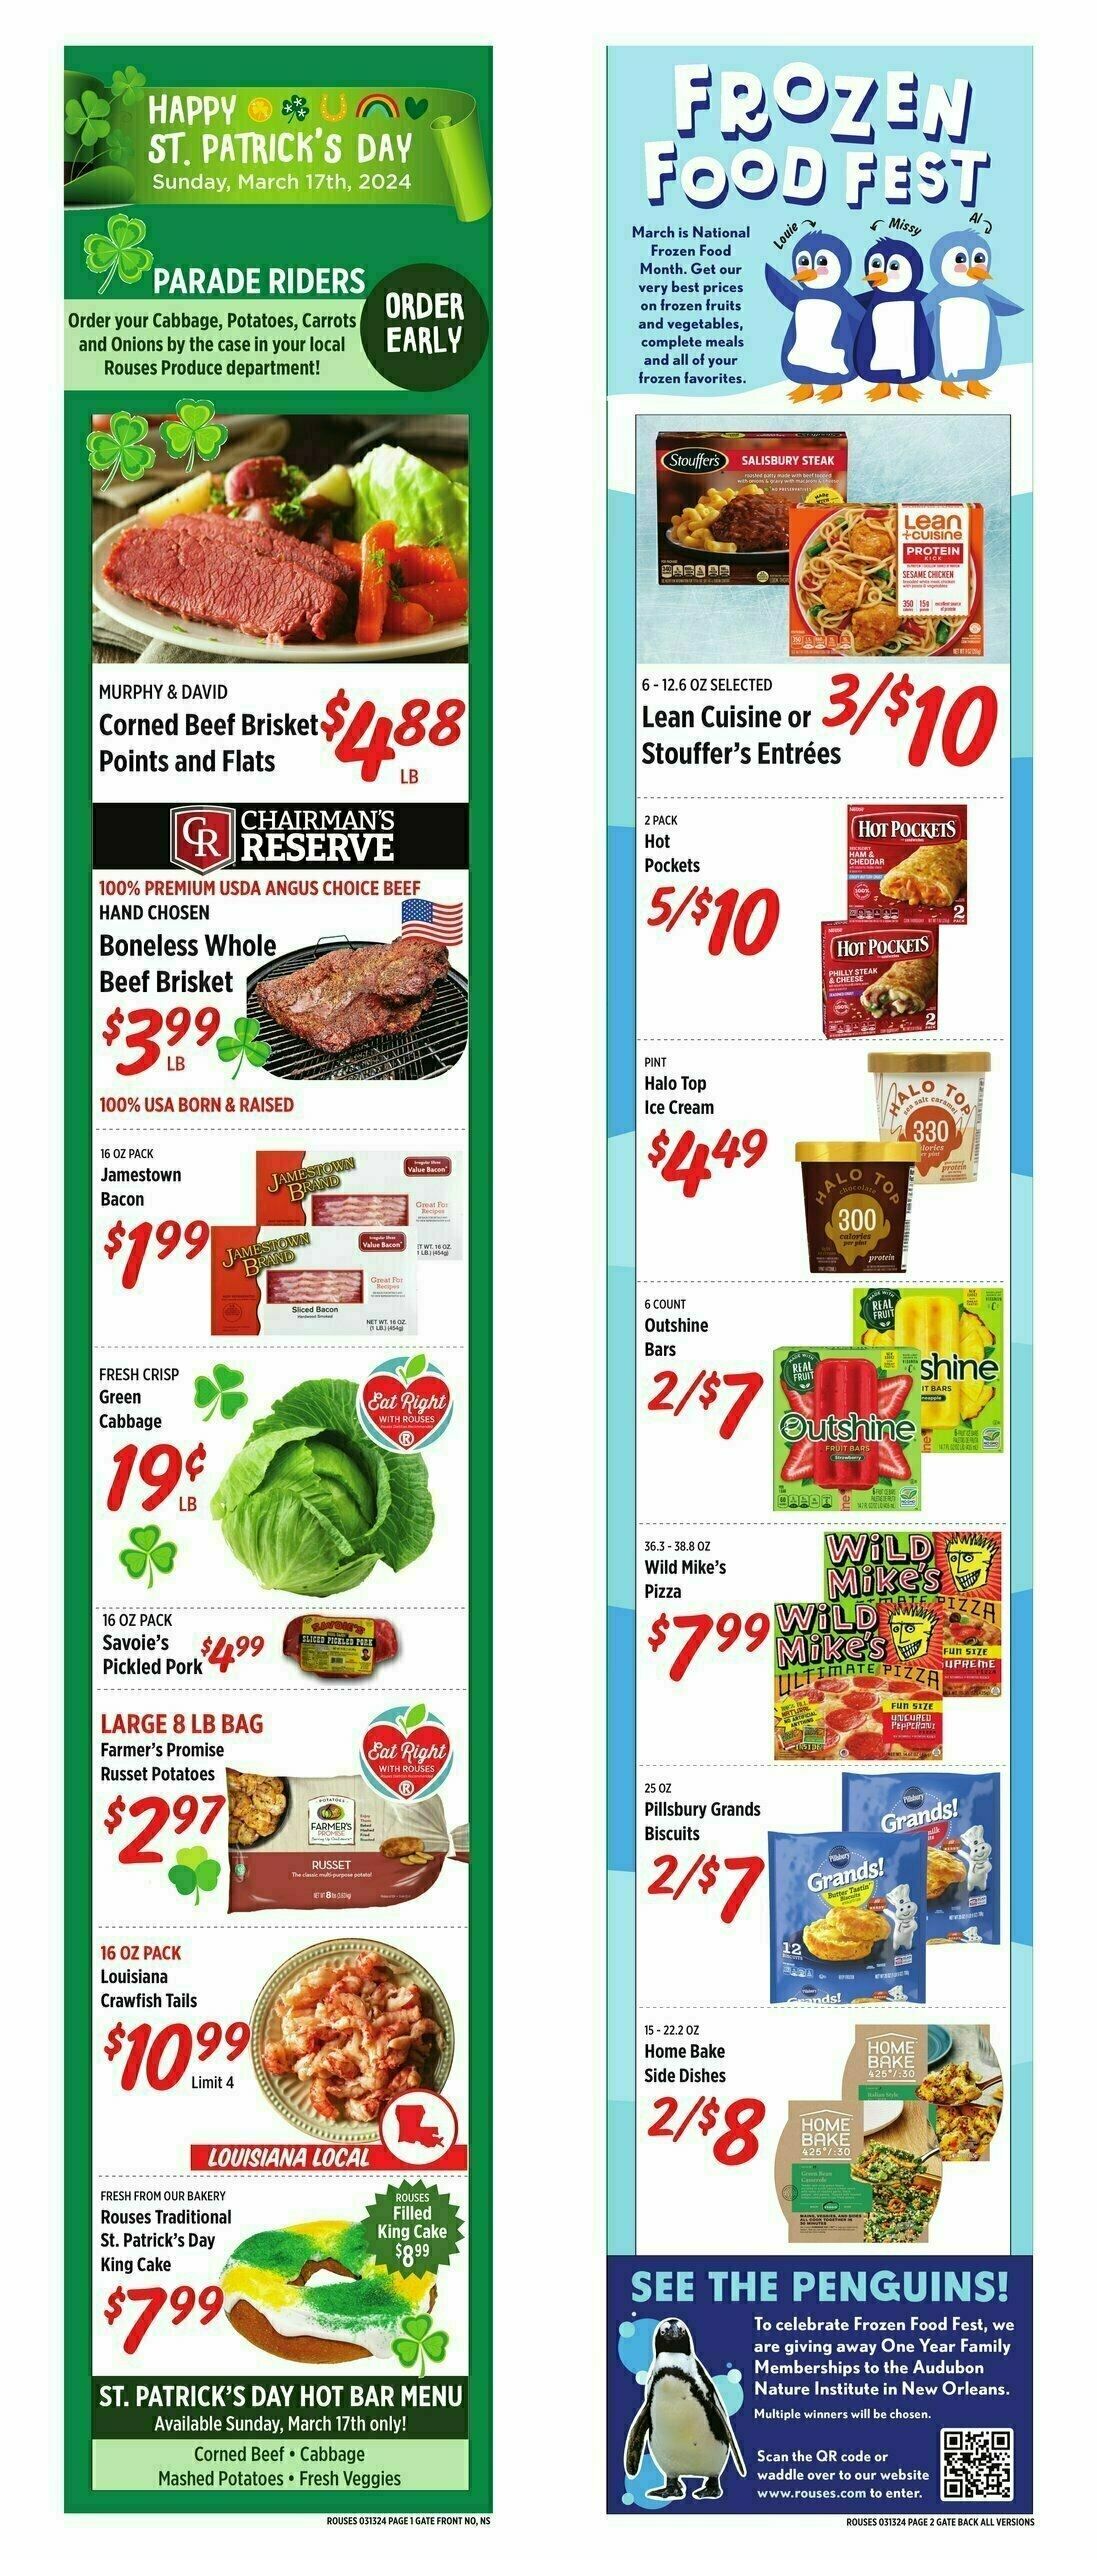 Rouses Markets Weekly Ad from March 13